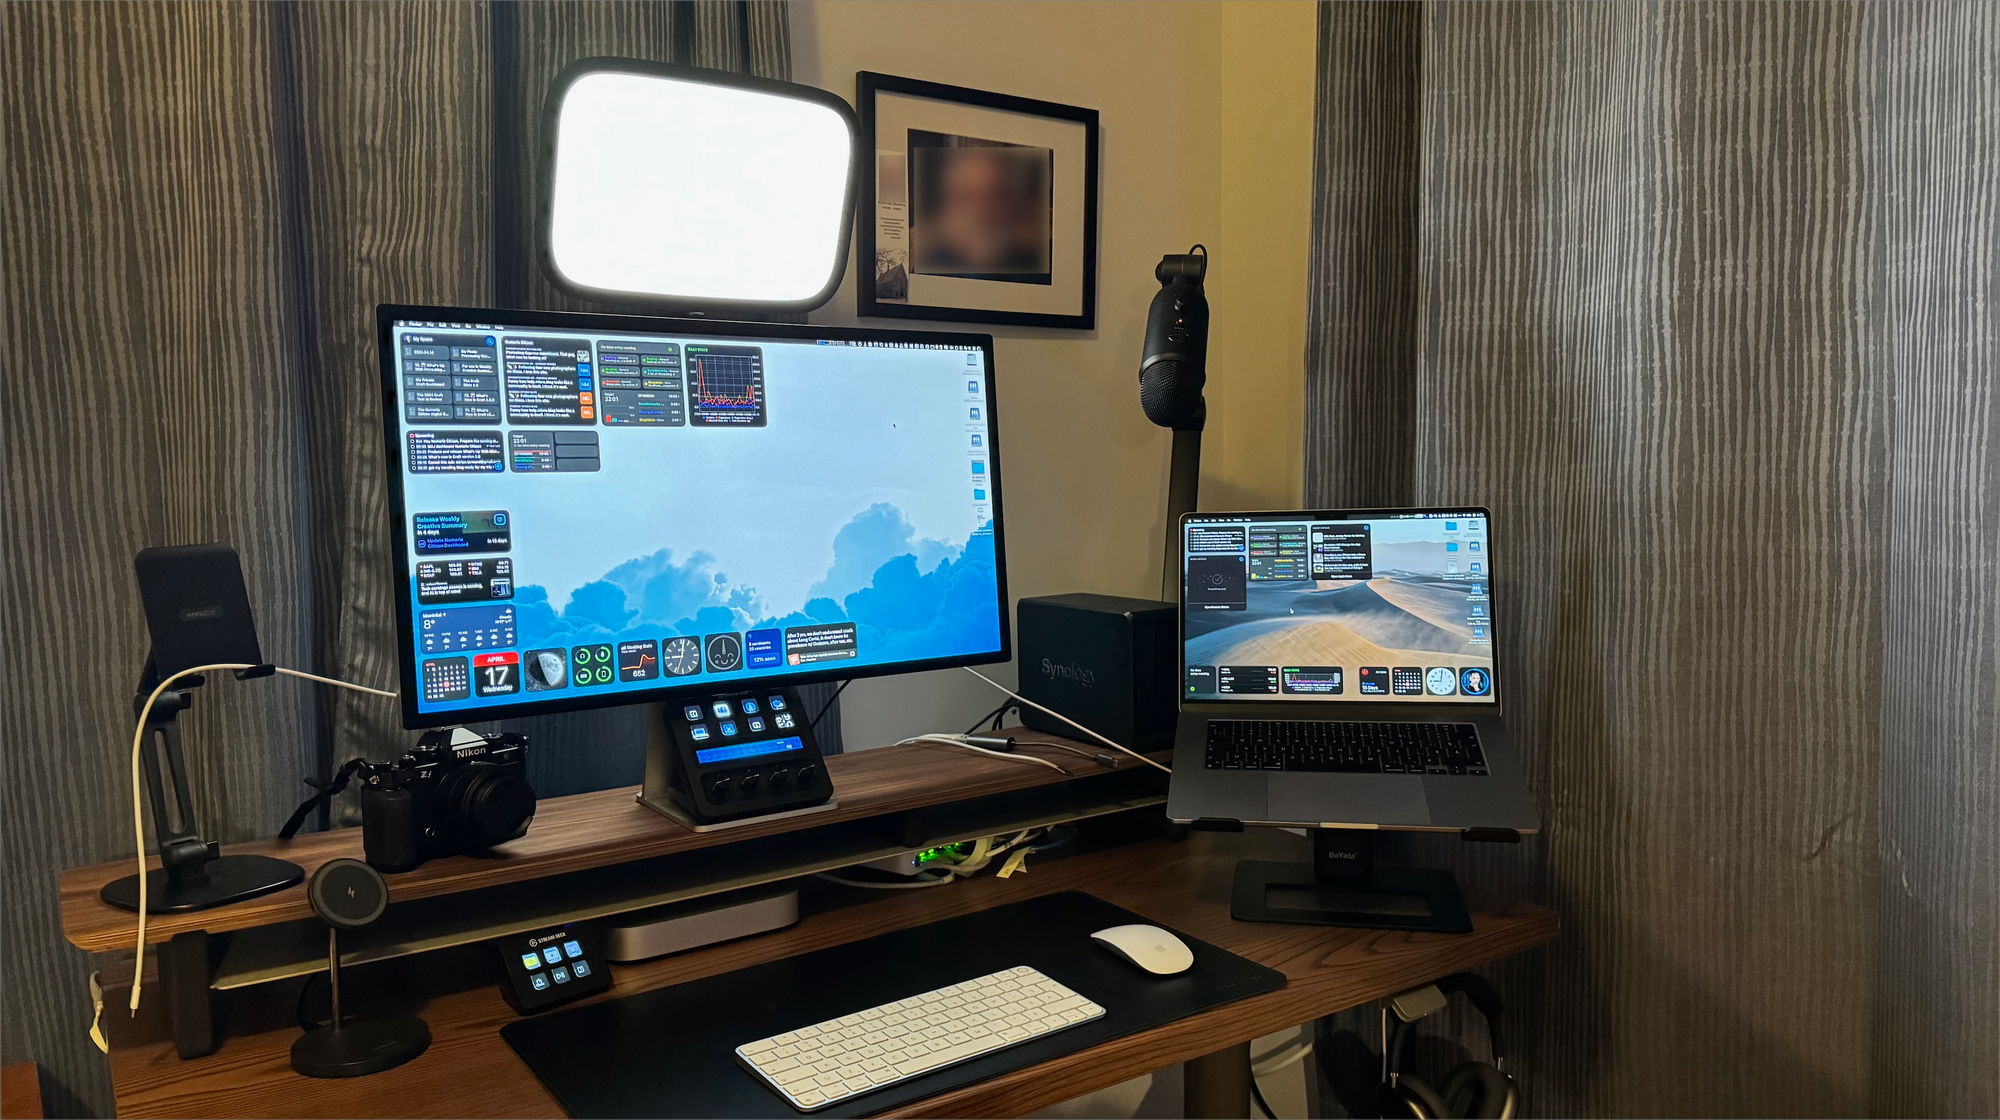 My Mac setup, edition 2024, showing the addition of the Grovemade tabletop shelf. The next version will include a Mac Studio instead of the Mac mini.